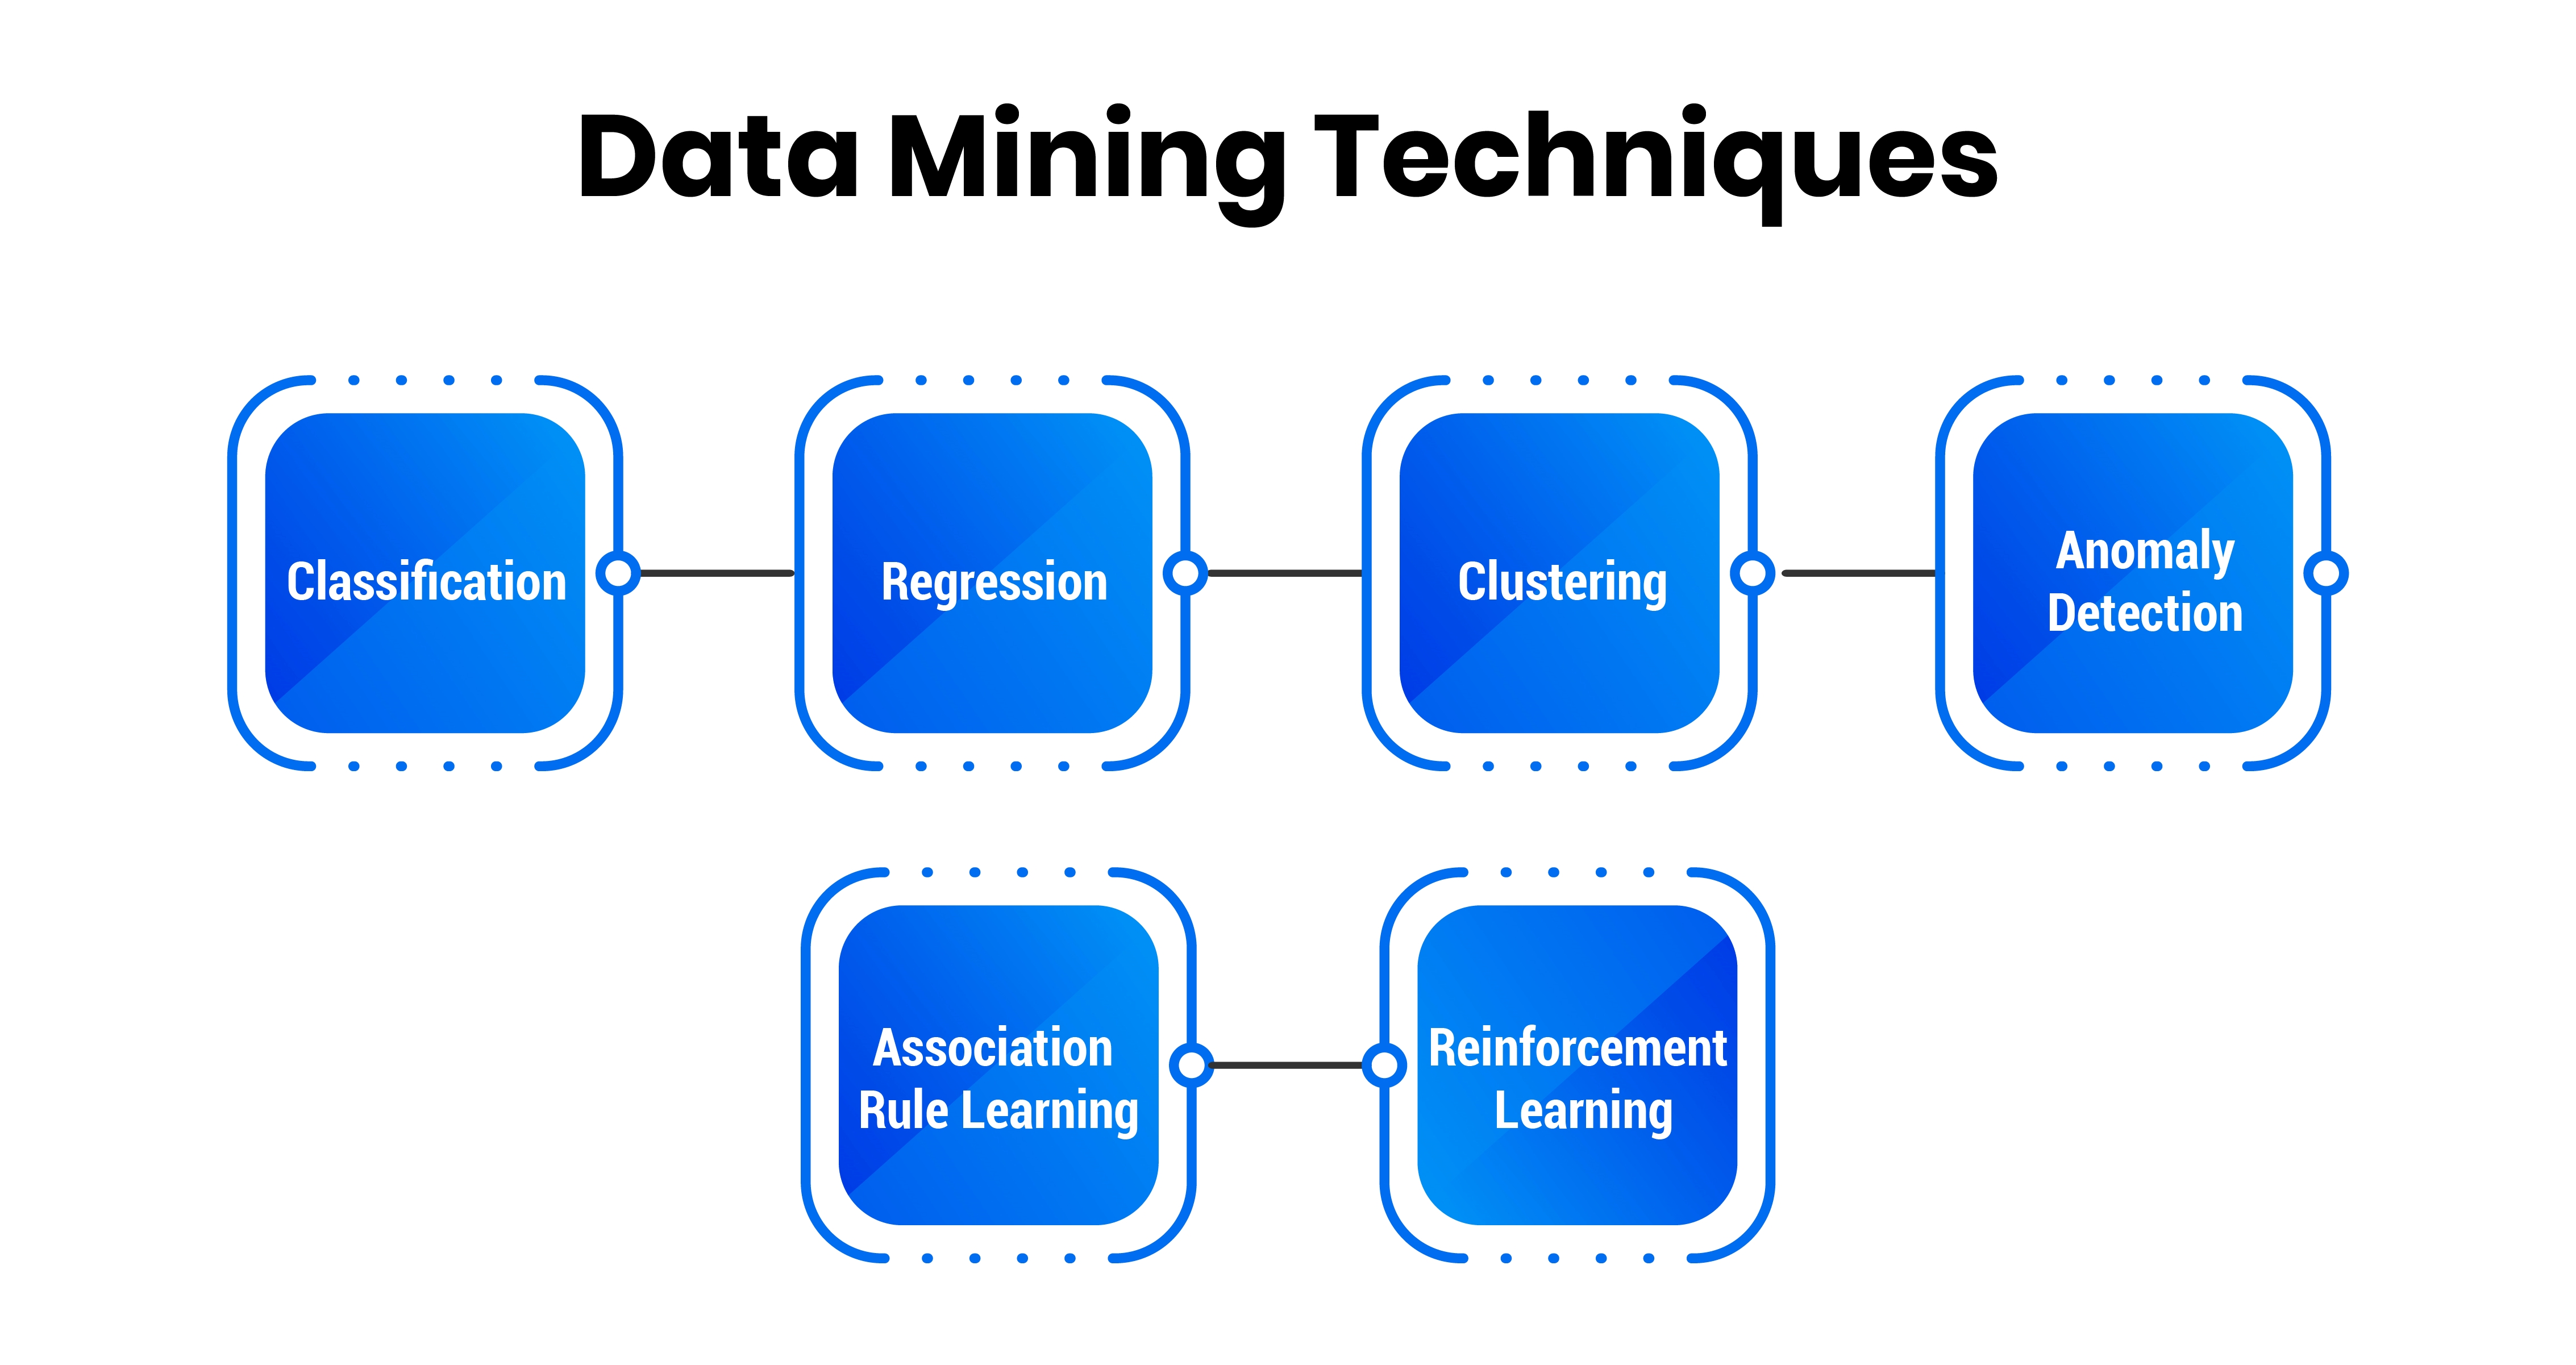 Data Mining Techniques - Algorithms Powering Discovery